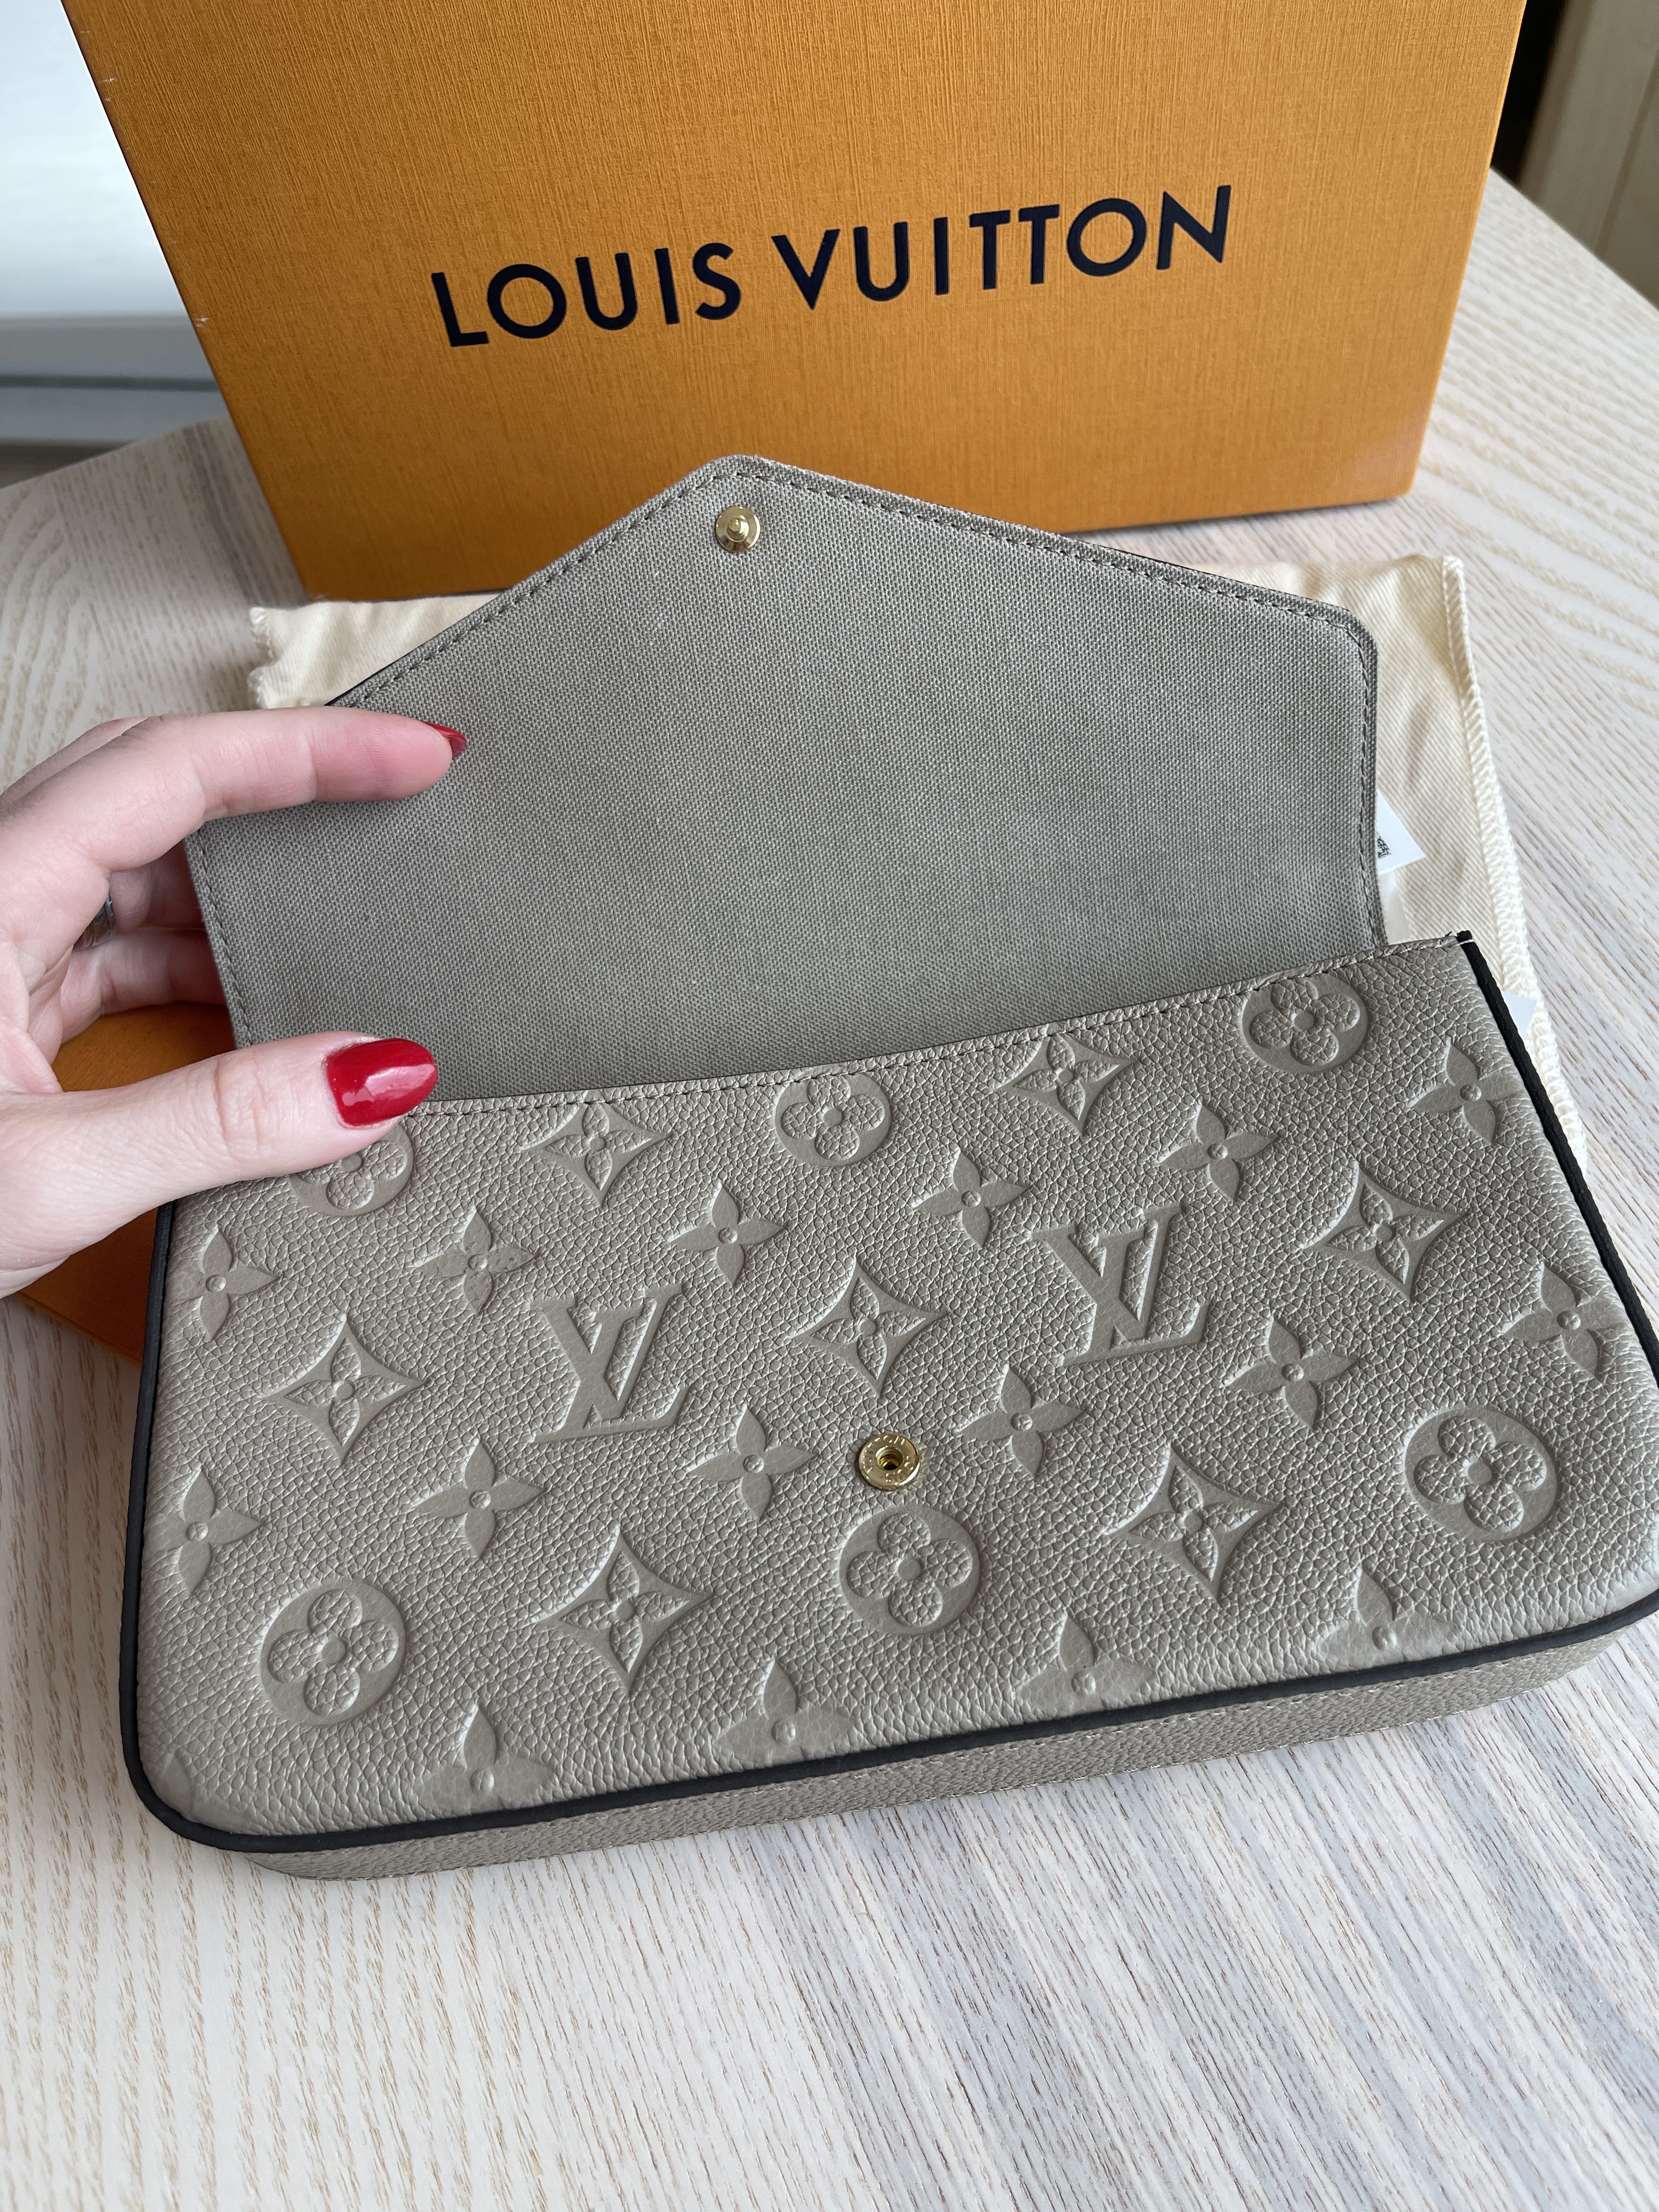 Louis Vuitton Pochette Felicie quality issues with turtledove empreinte  leather - YET AGAIN?! Review 